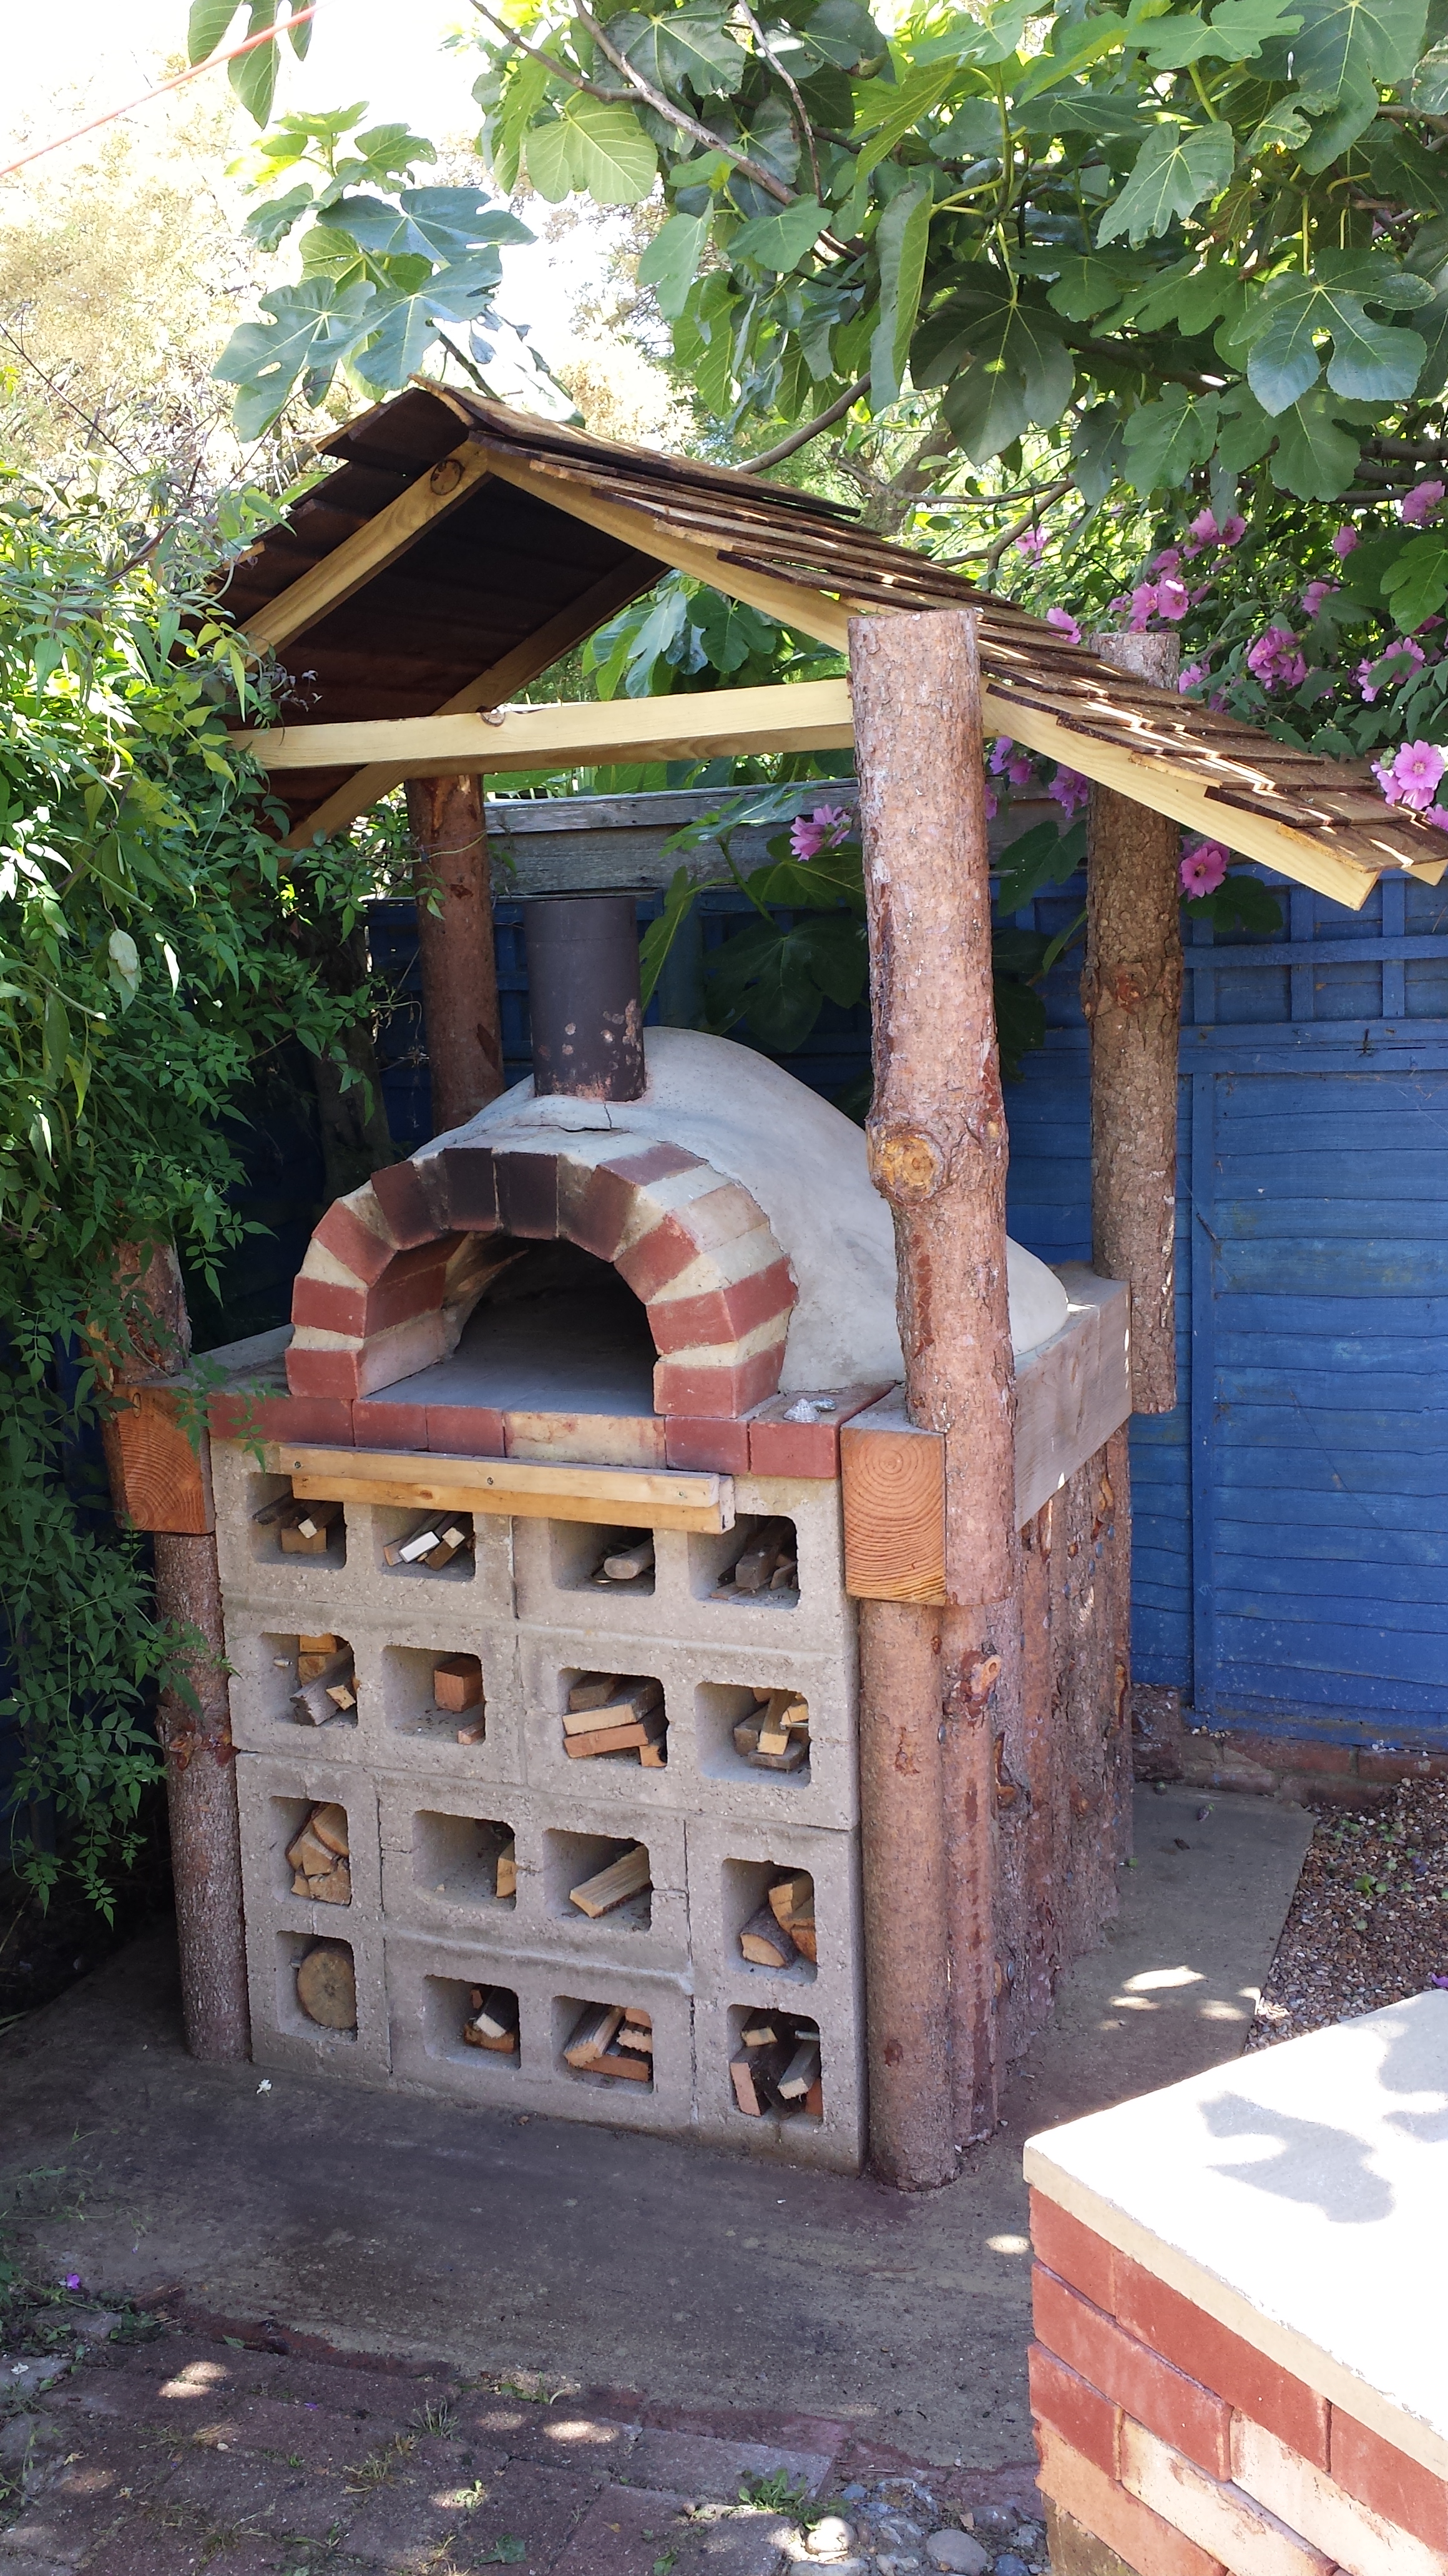 20130728 154320 The Clay Oven